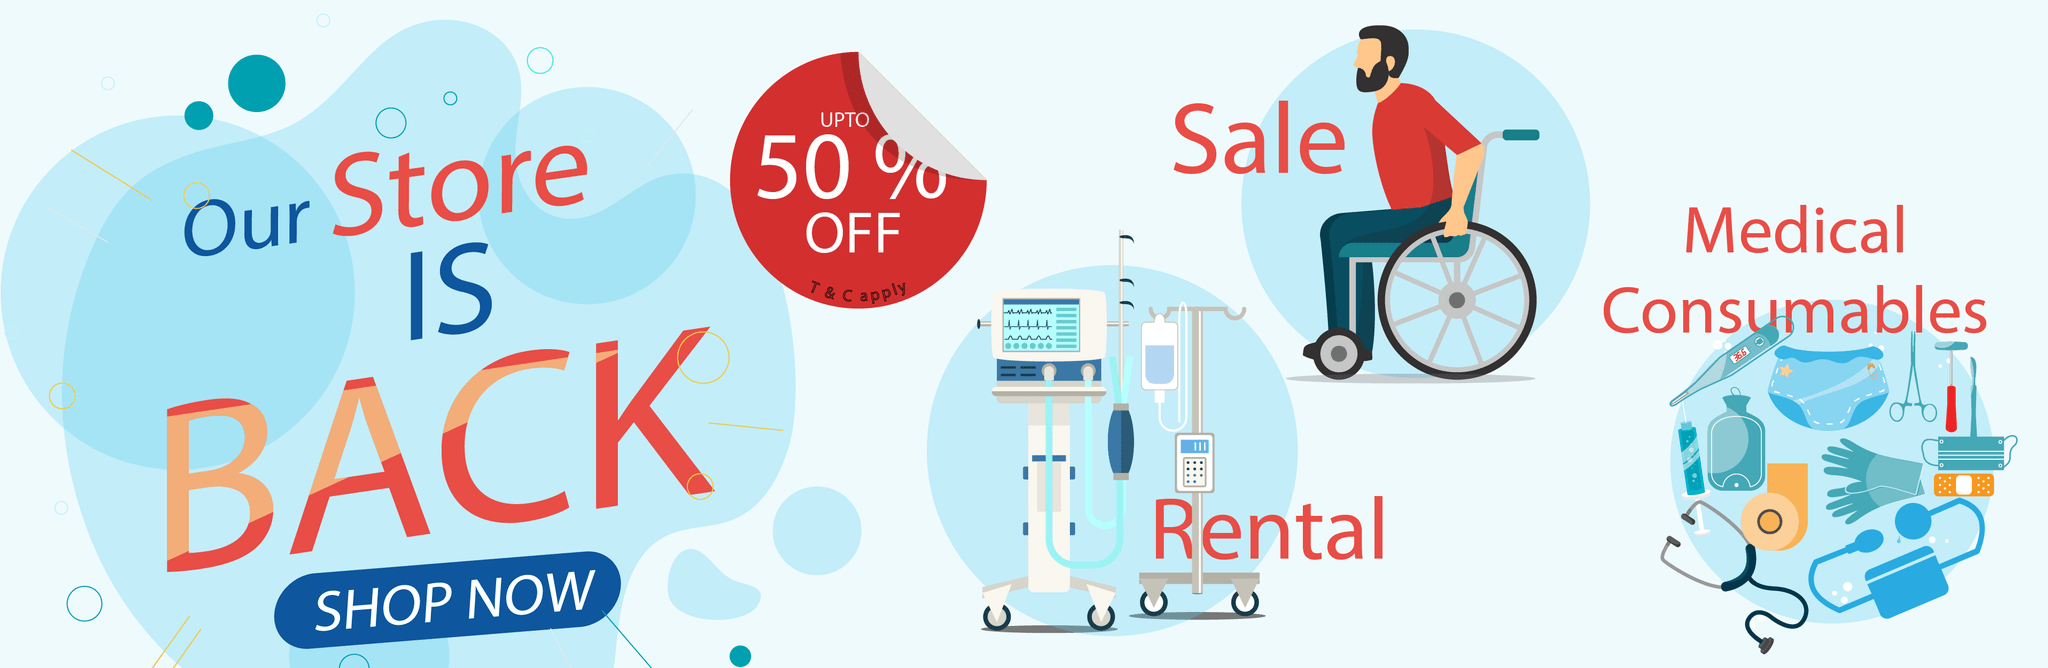 Home Health Care Product Offers on Rental & Sale